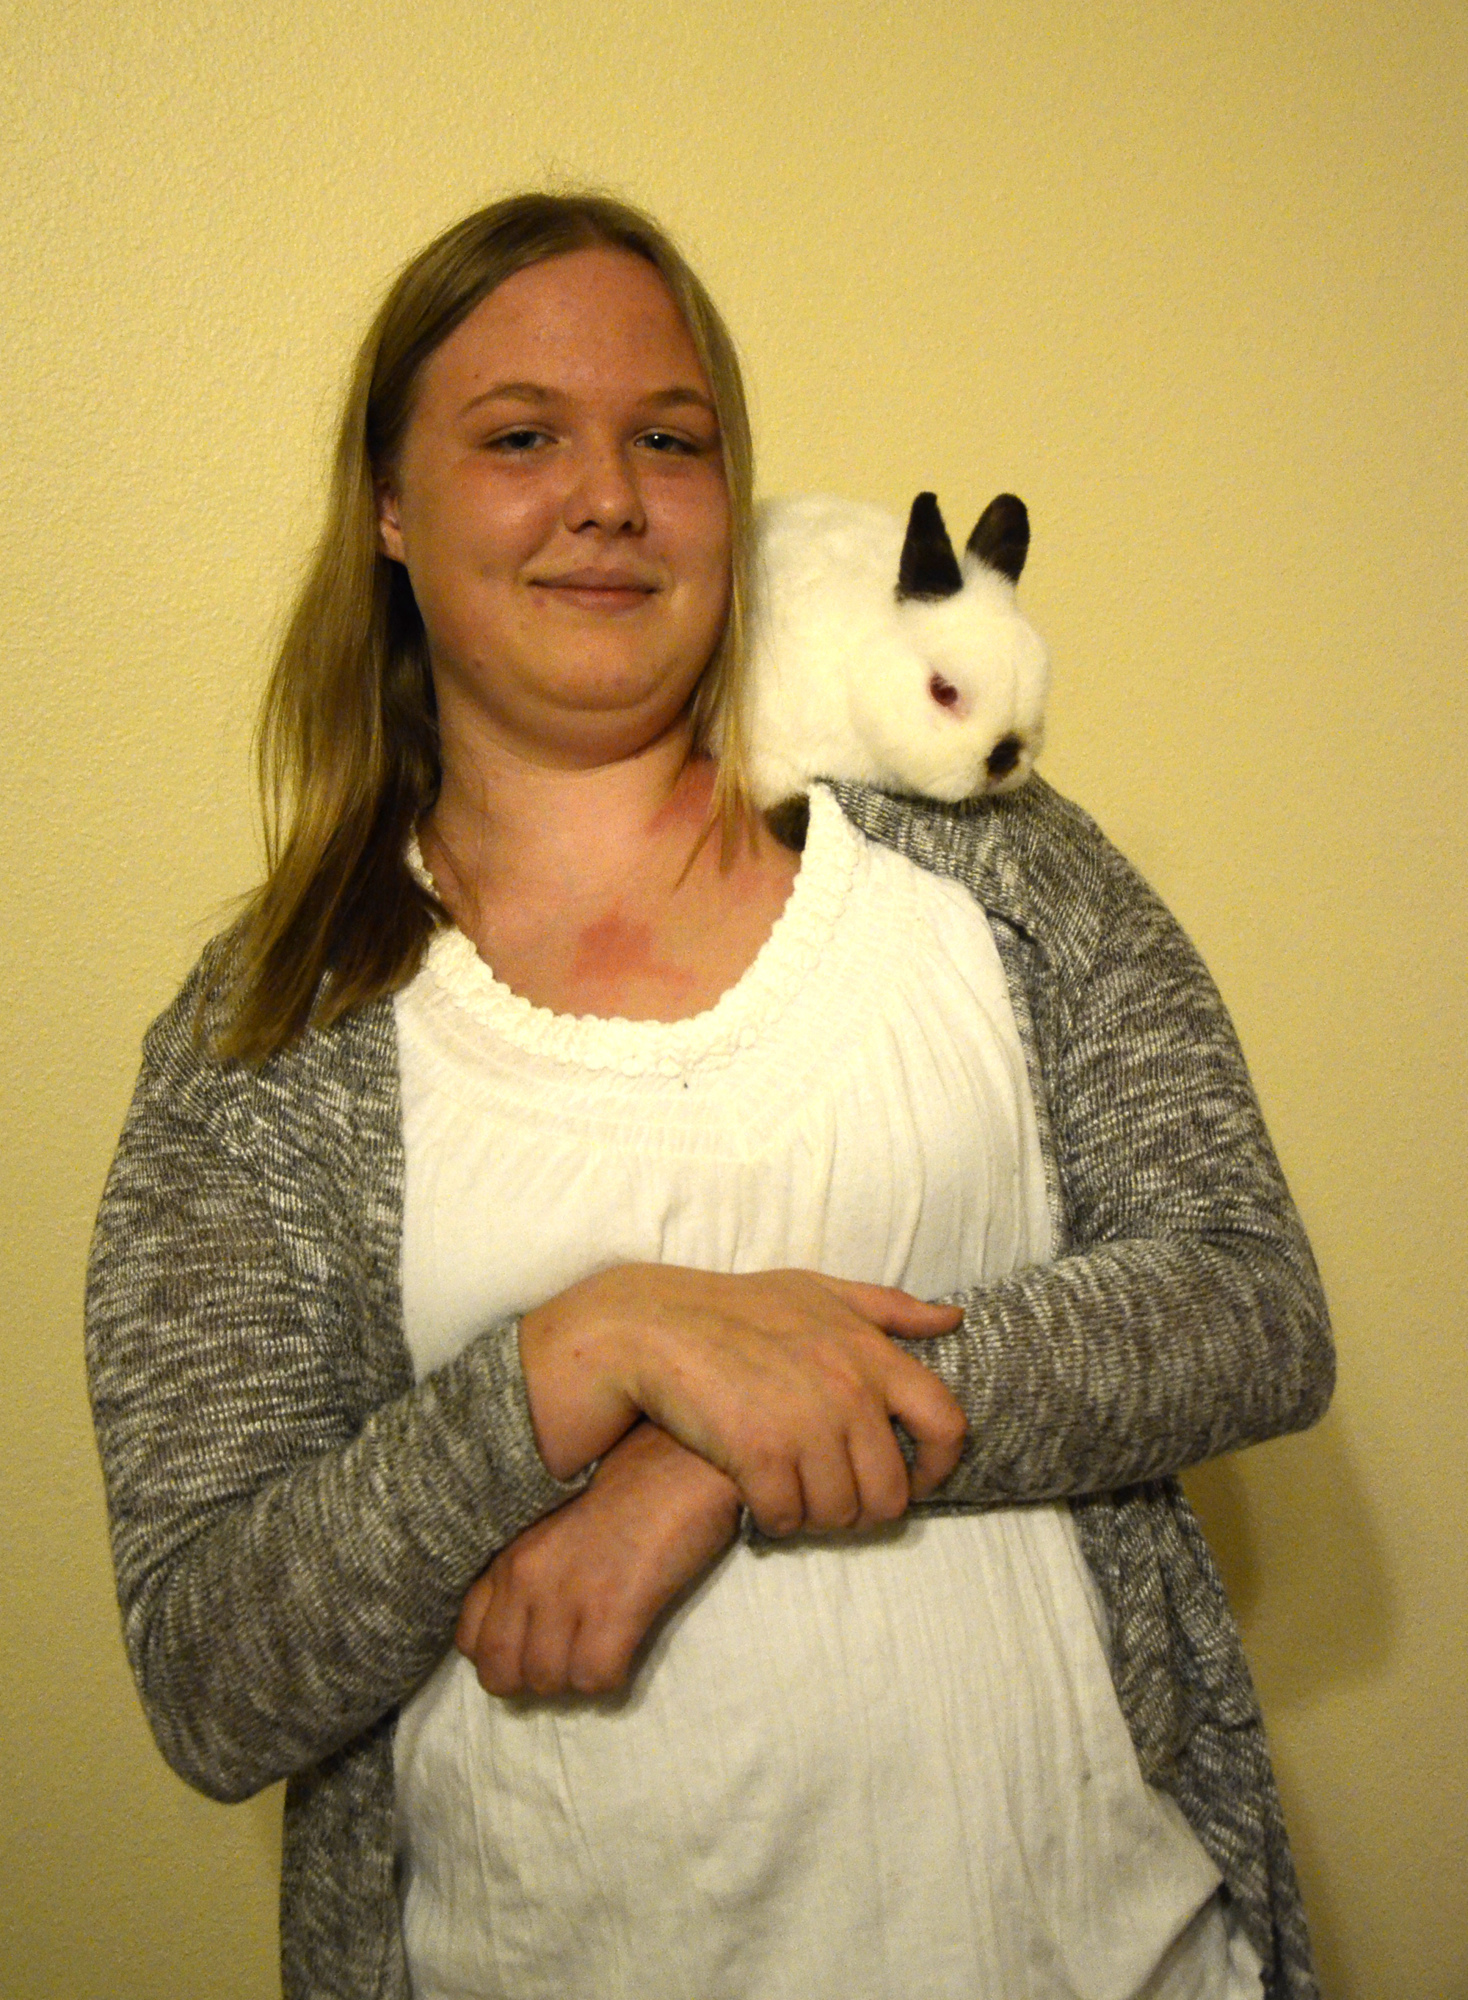 Ashley Scalzi's bunny, Ace, likes to sit on her shoulder.